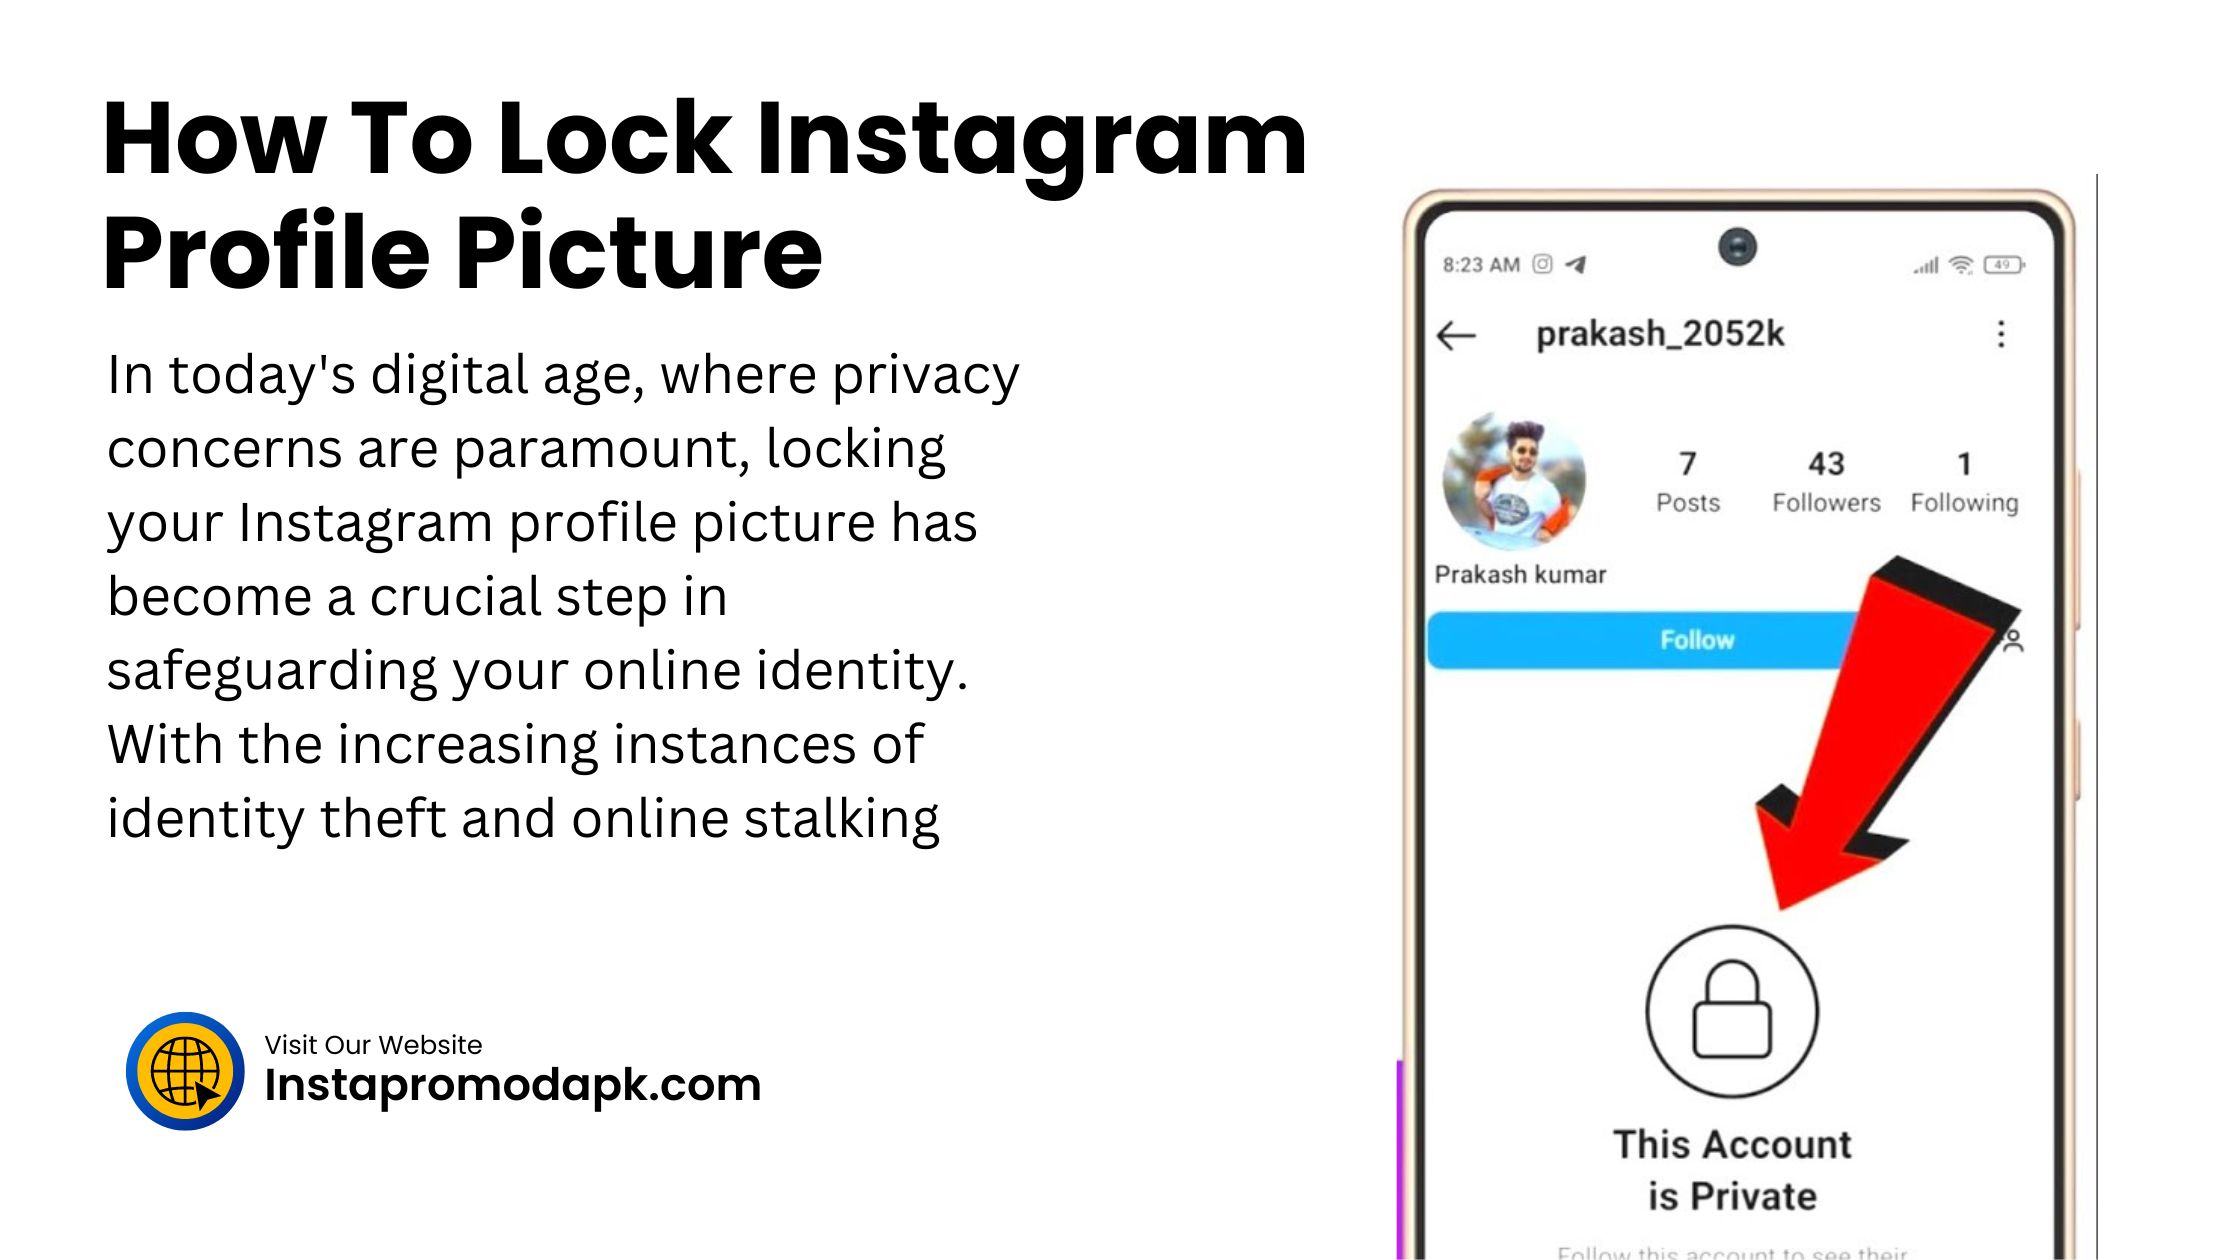 How To Lock Instagram Profile Picture